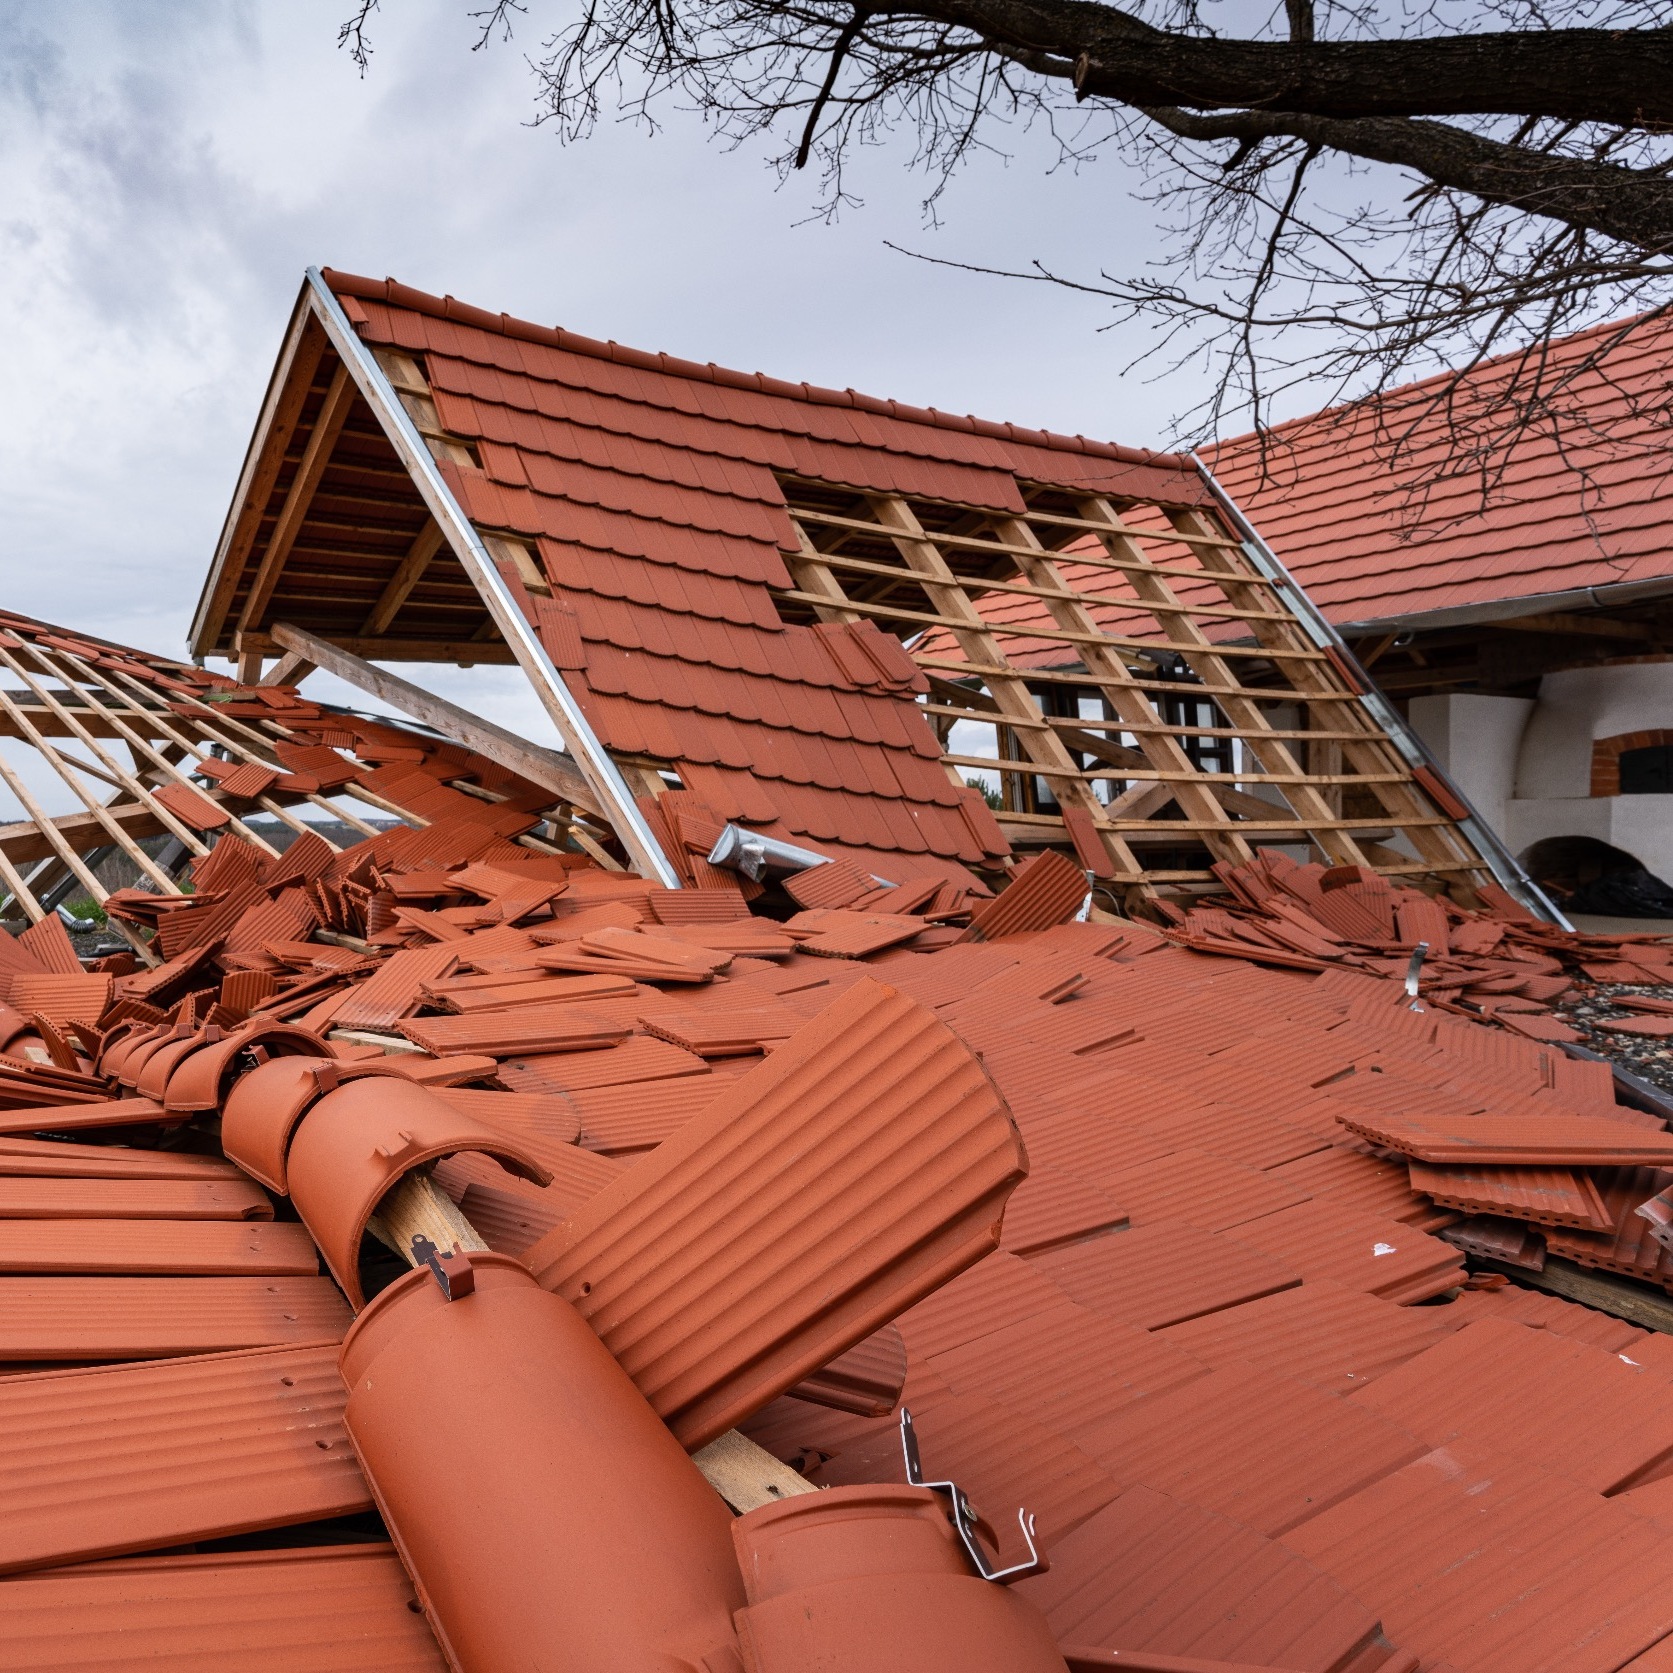 roof tiles strewn by wind storm